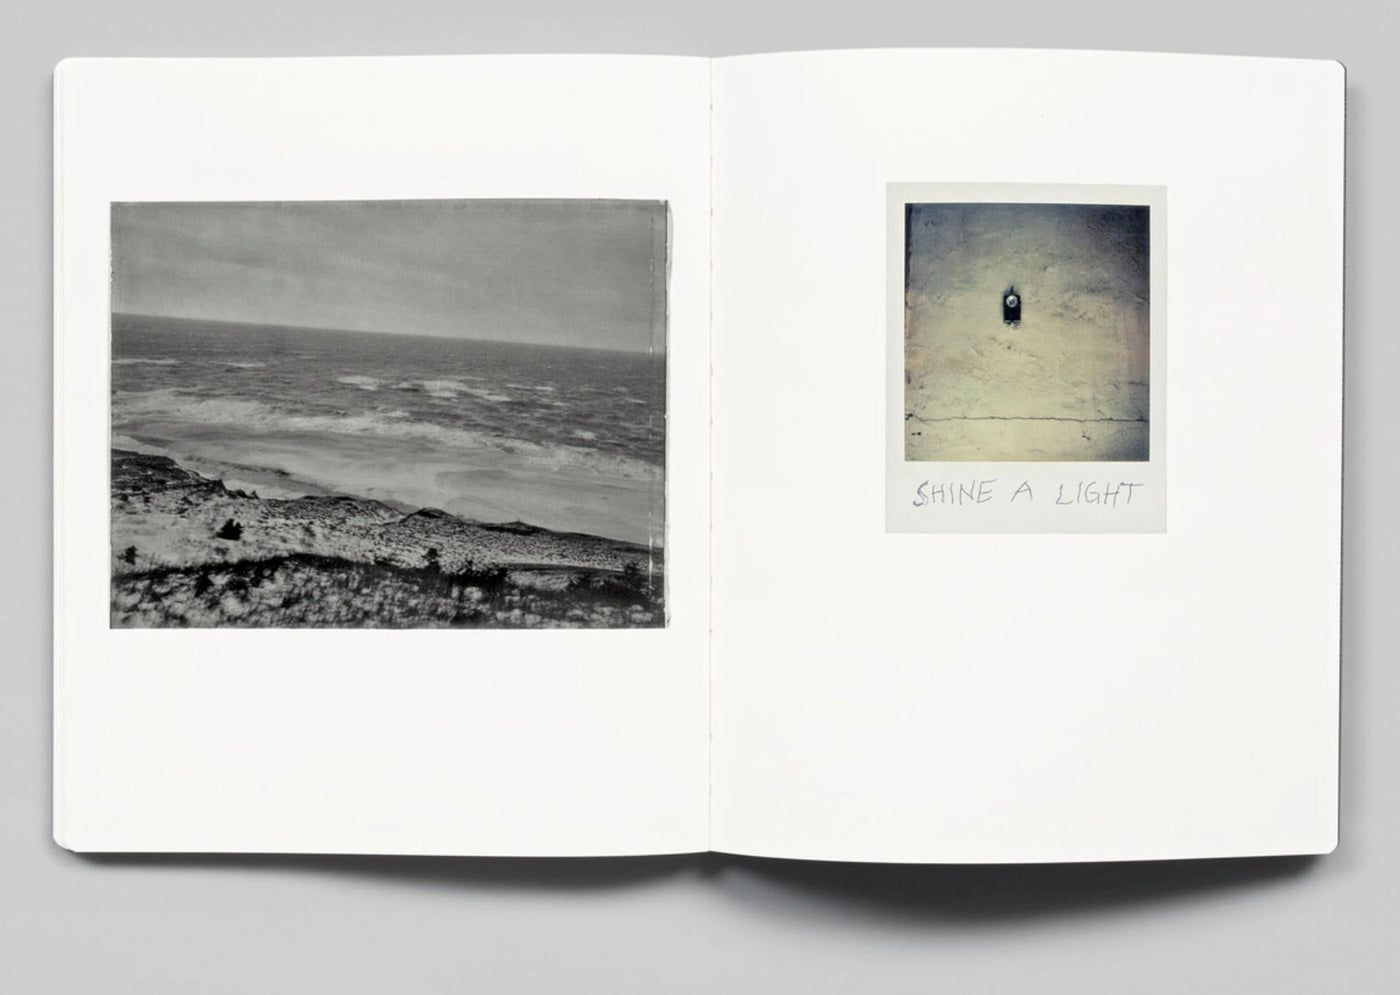 6 volumes of the visual diaries by Robert Frank - Tipi bookshop